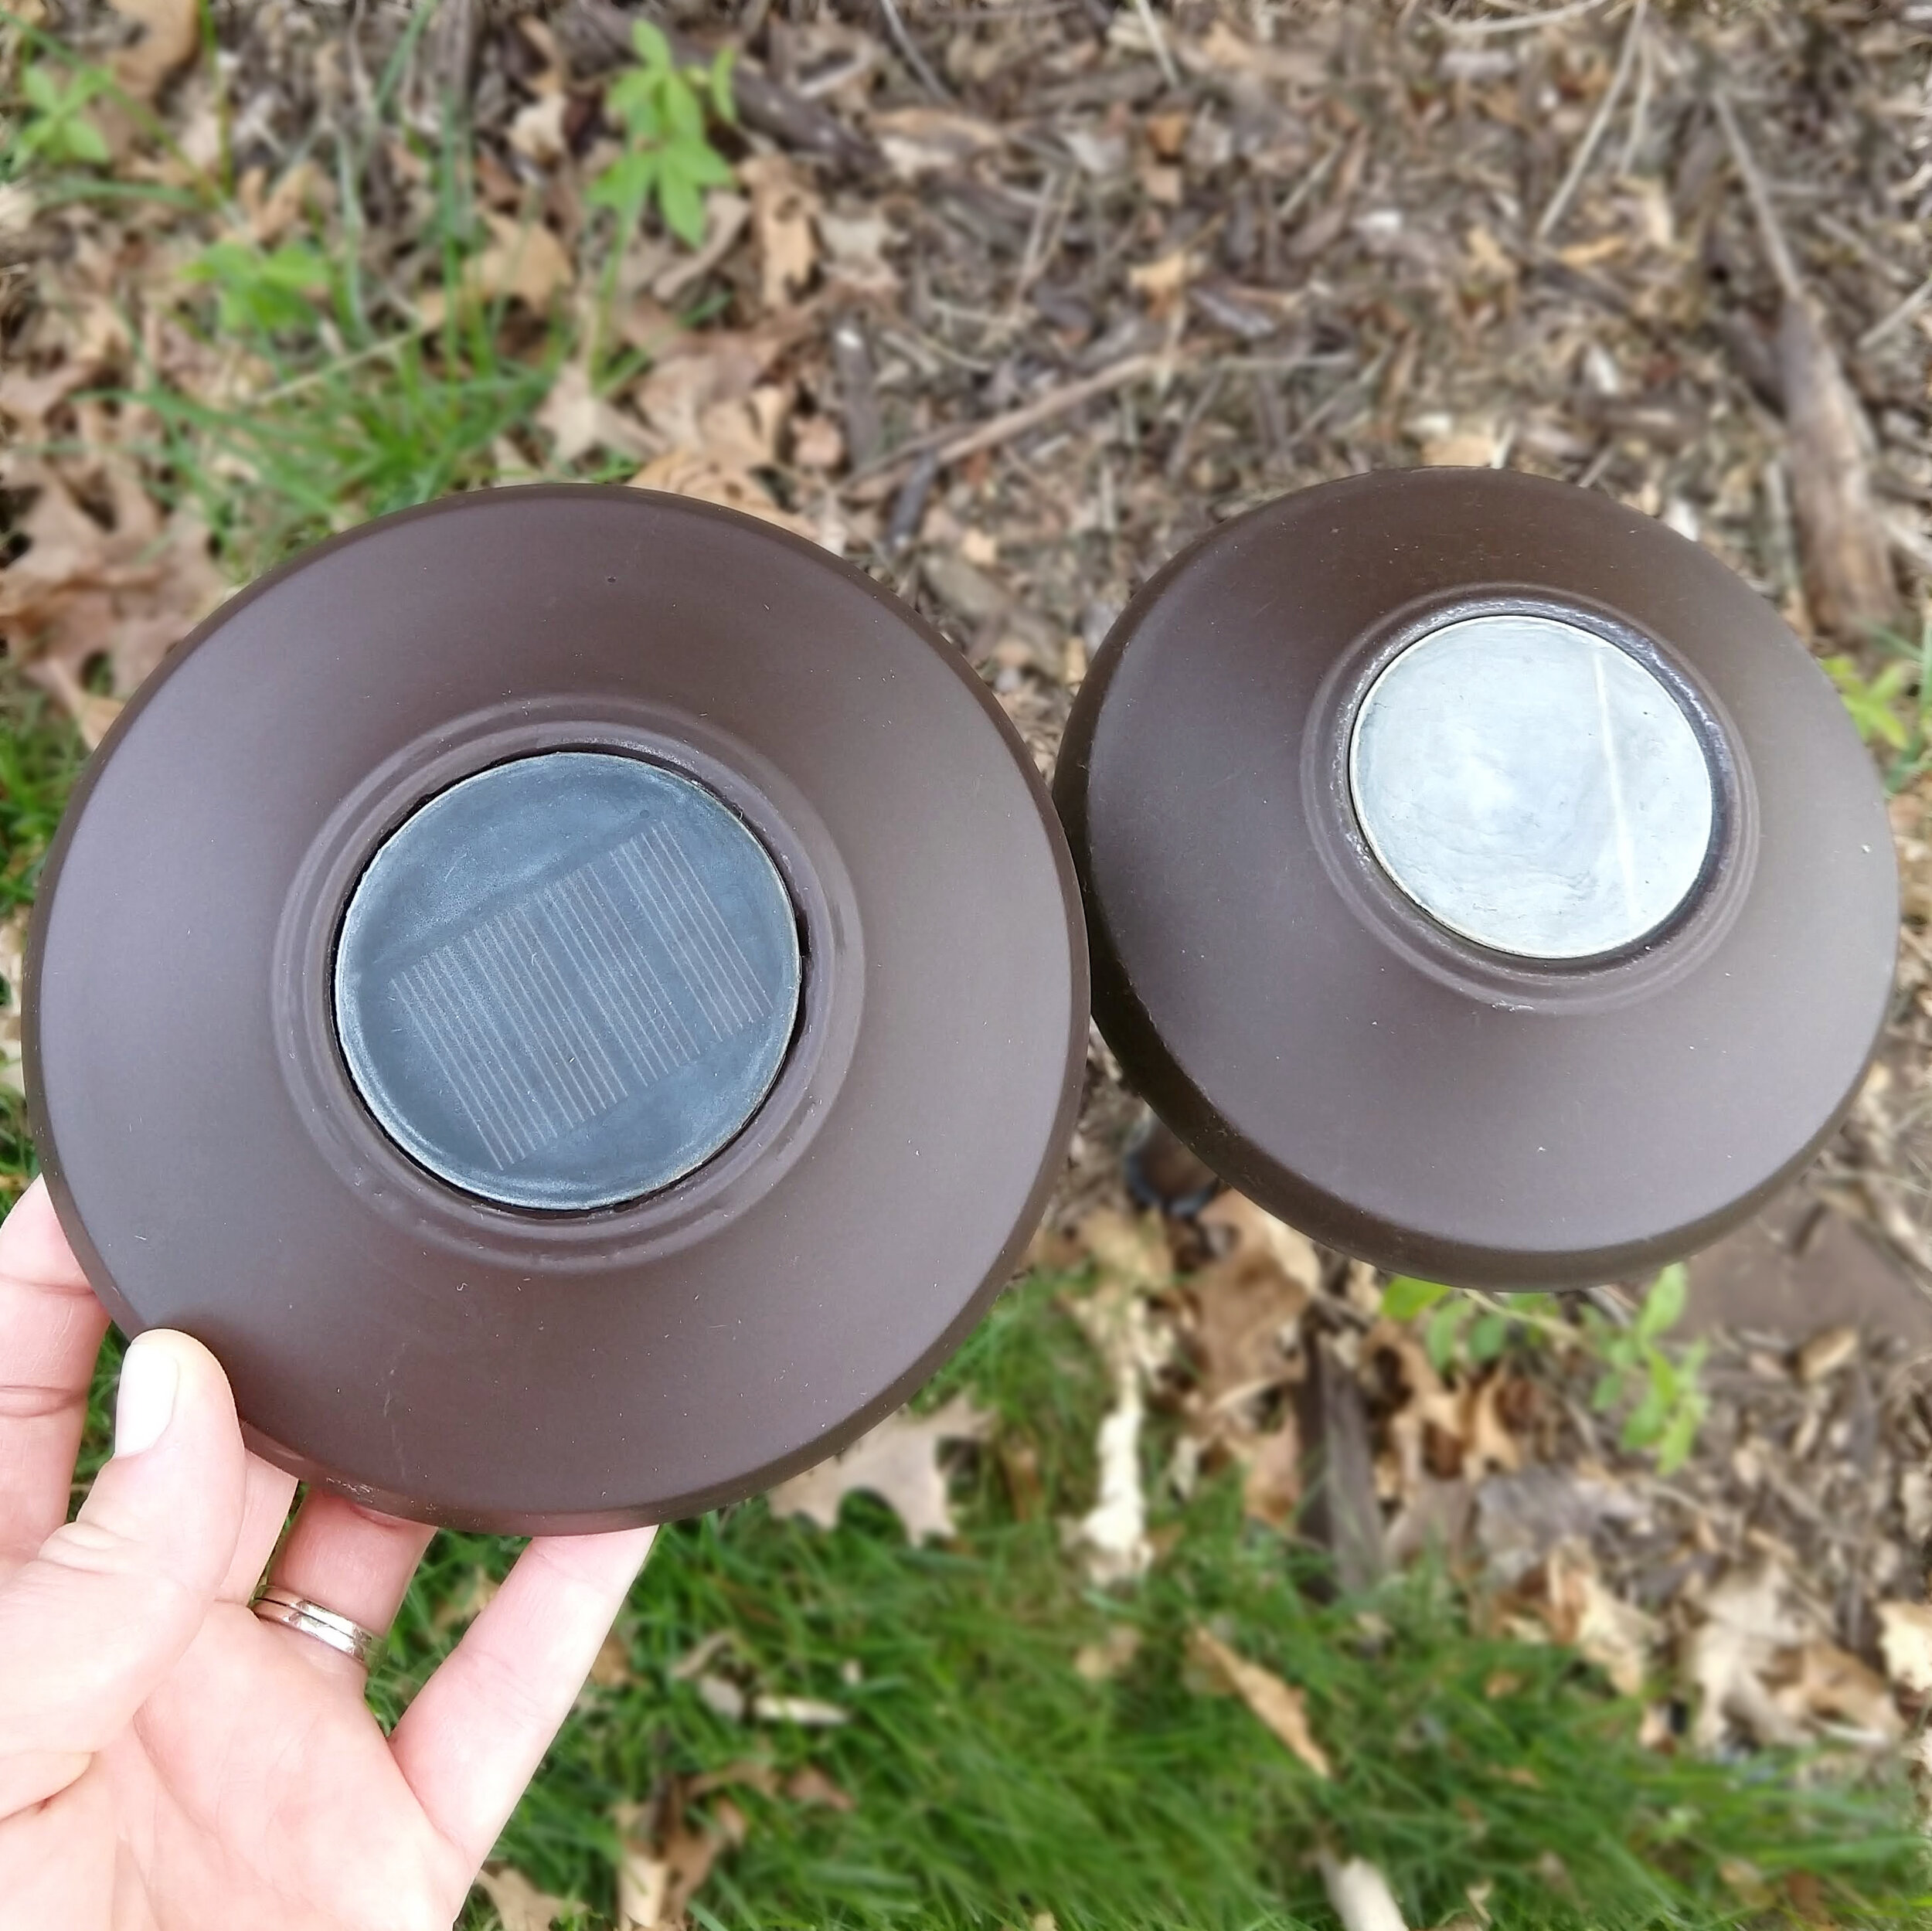 Pictured Above: Solar light on the right is before doing any of the steps mentioned above. The light on the left is after some progress of spraying with water and sanding!